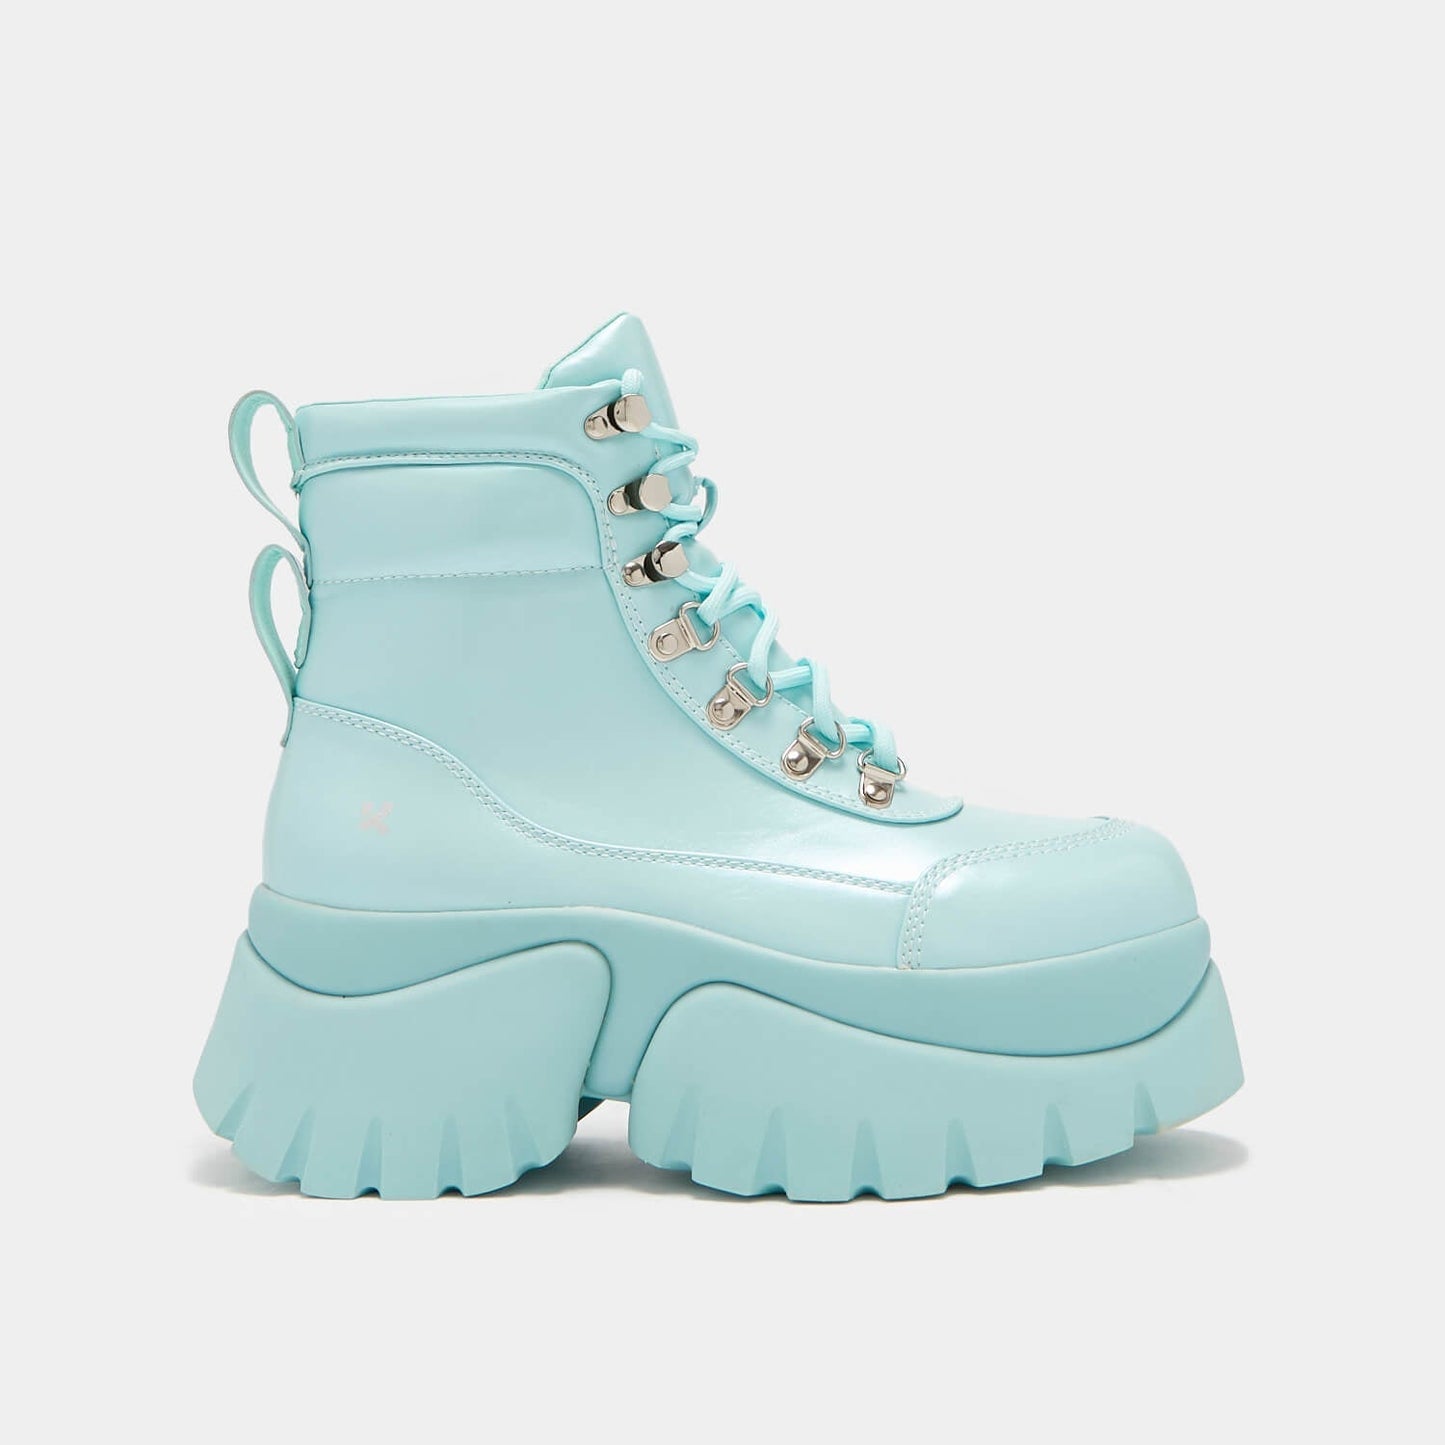 Gooey Baby Blue Platform Boots - Ankle Boots - KOI Footwear - Blue - Side View